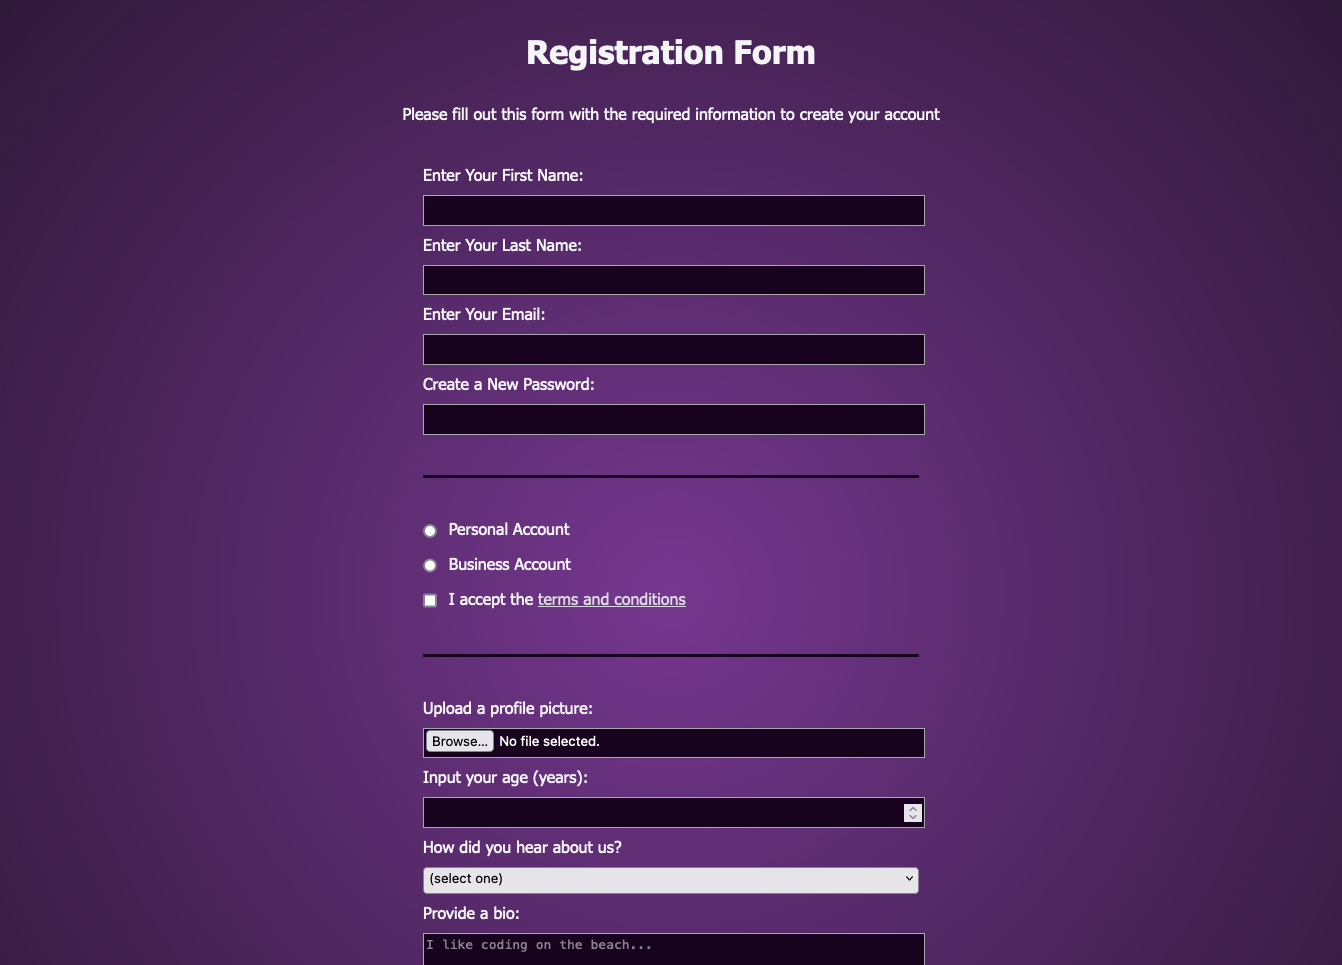 a basic registration form for a website with inputs for name, email, account type, profile image, and bio